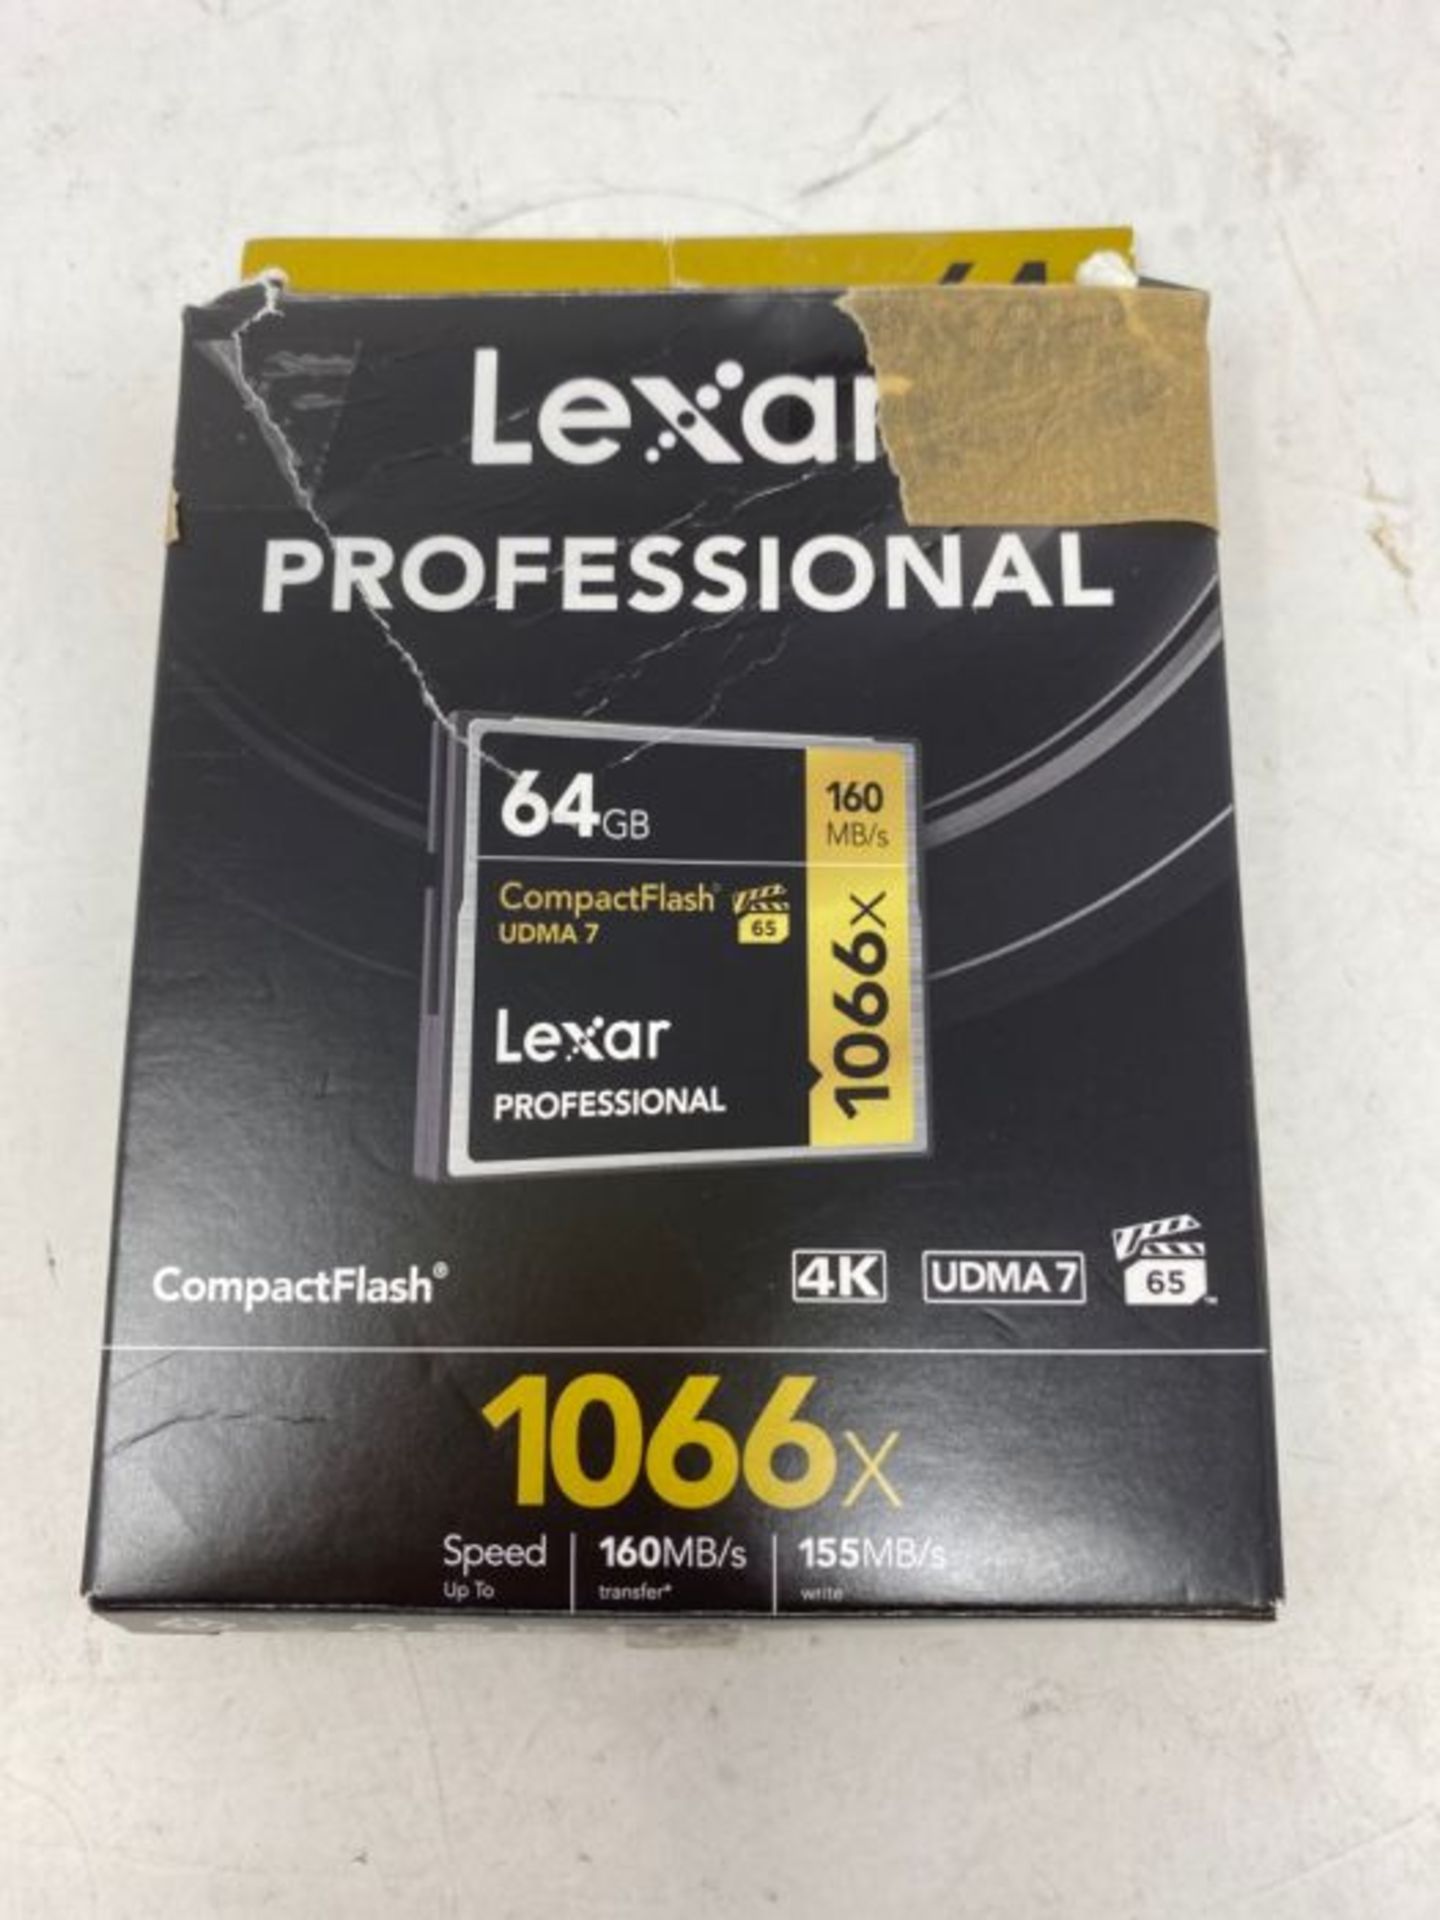 RRP £91.00 Lexar Professional 1066x 64GB CompactFlash Card, Up to 160MB/s Read, for Professional - Image 2 of 3